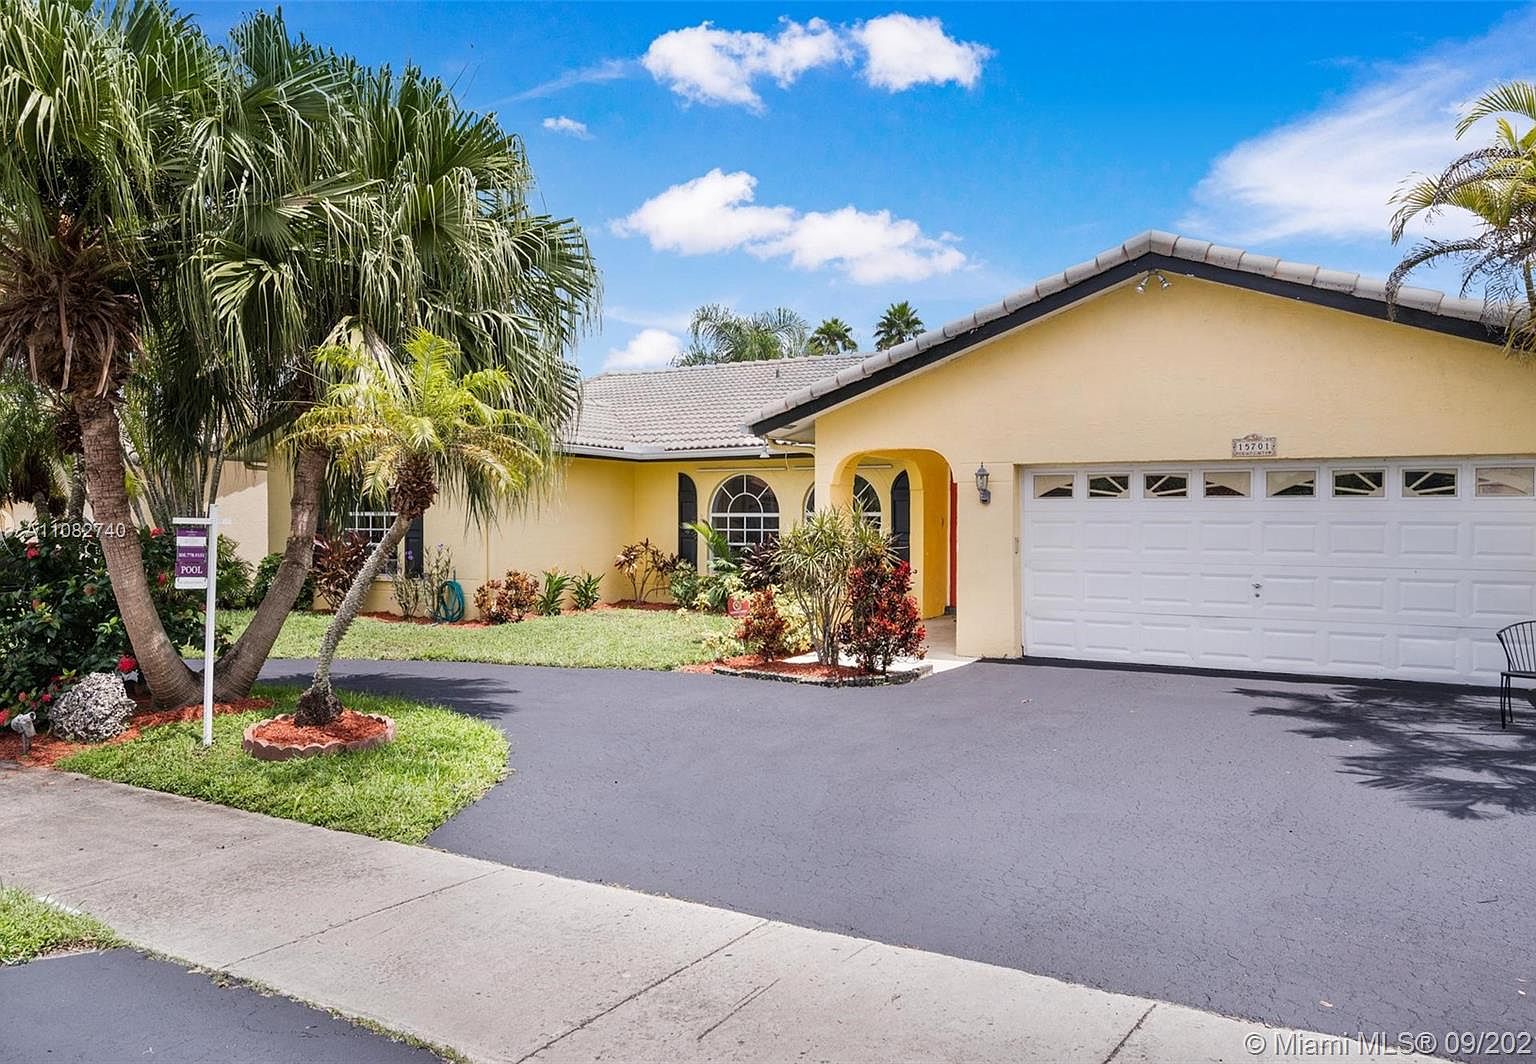 Gables Miami Single Family Homes For Sale - 1 Homes - Zillow